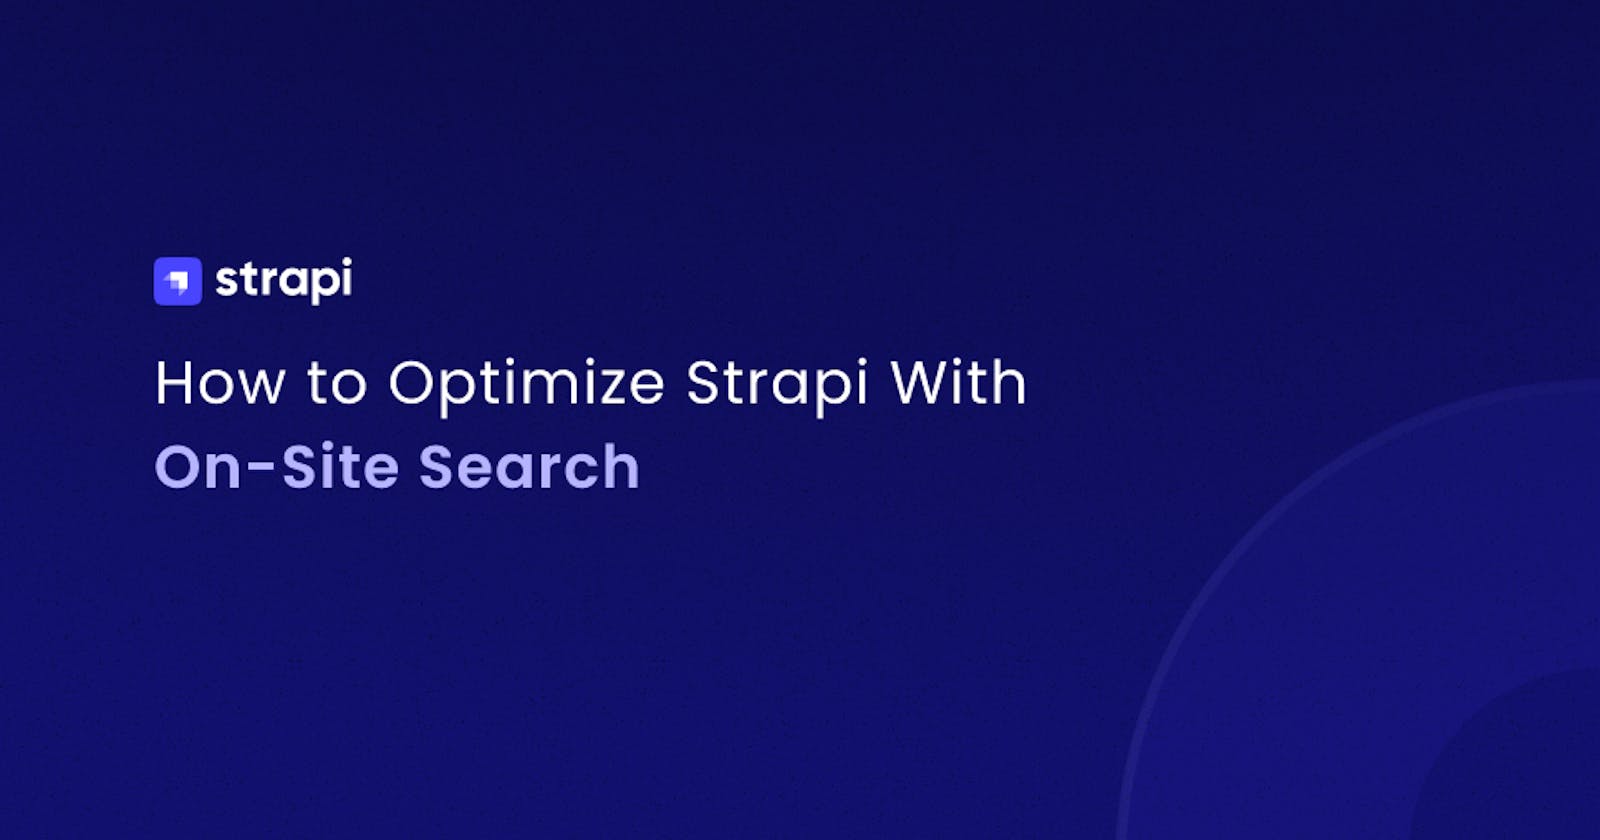 How to Optimize Strapi With On-Site Search